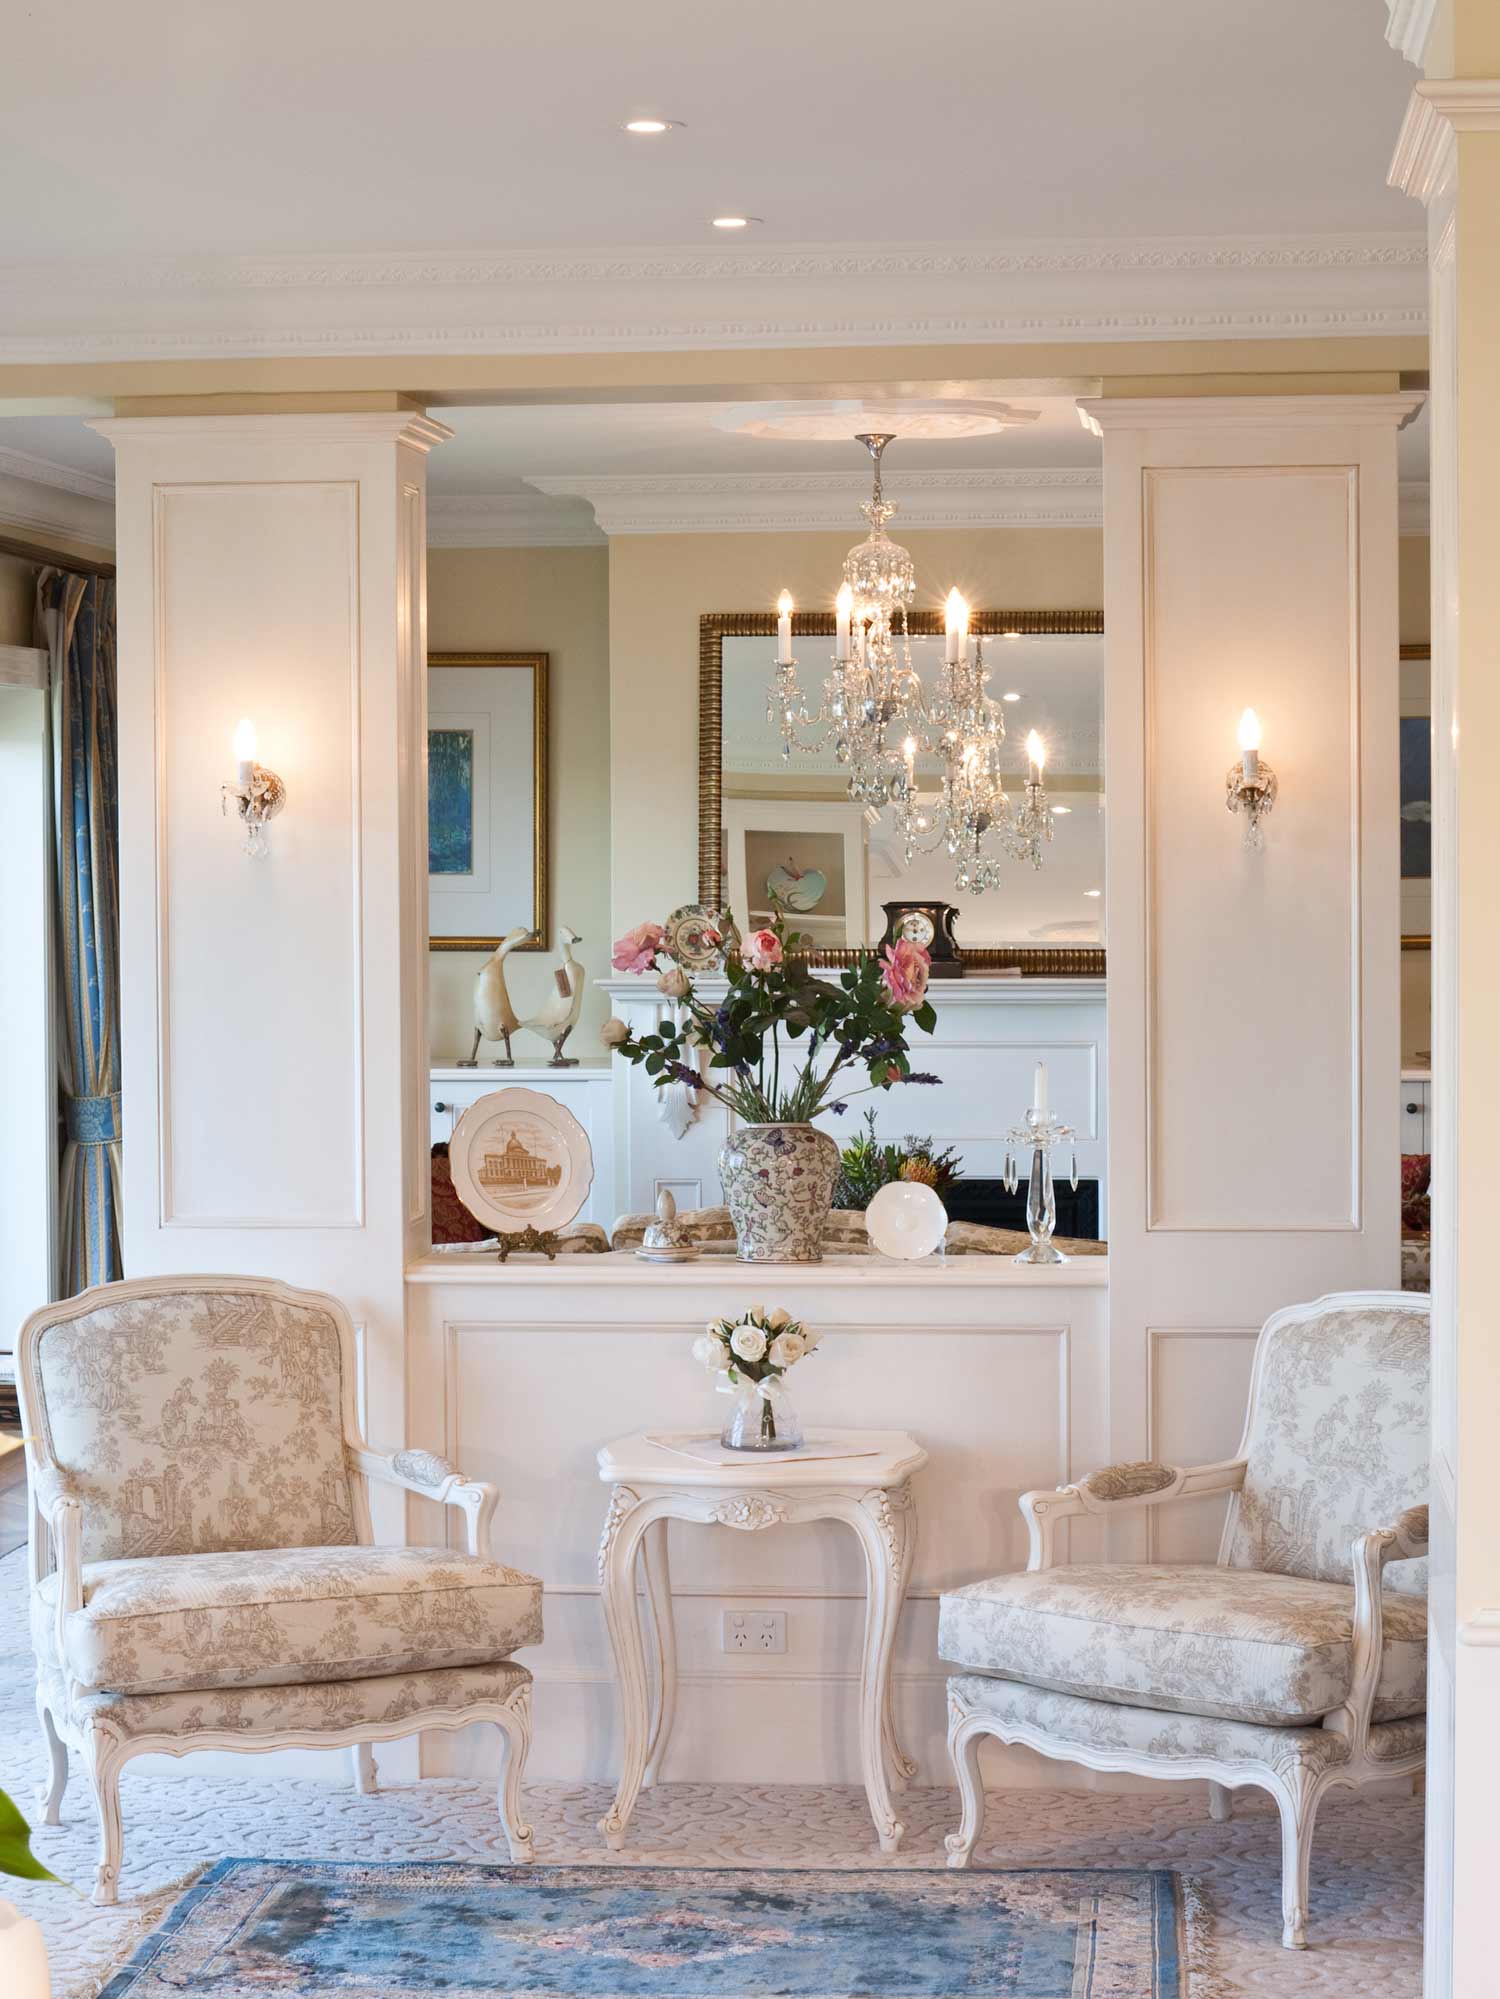 1 Wall panelling in french lounge interior with armchairs, side table and chandelier